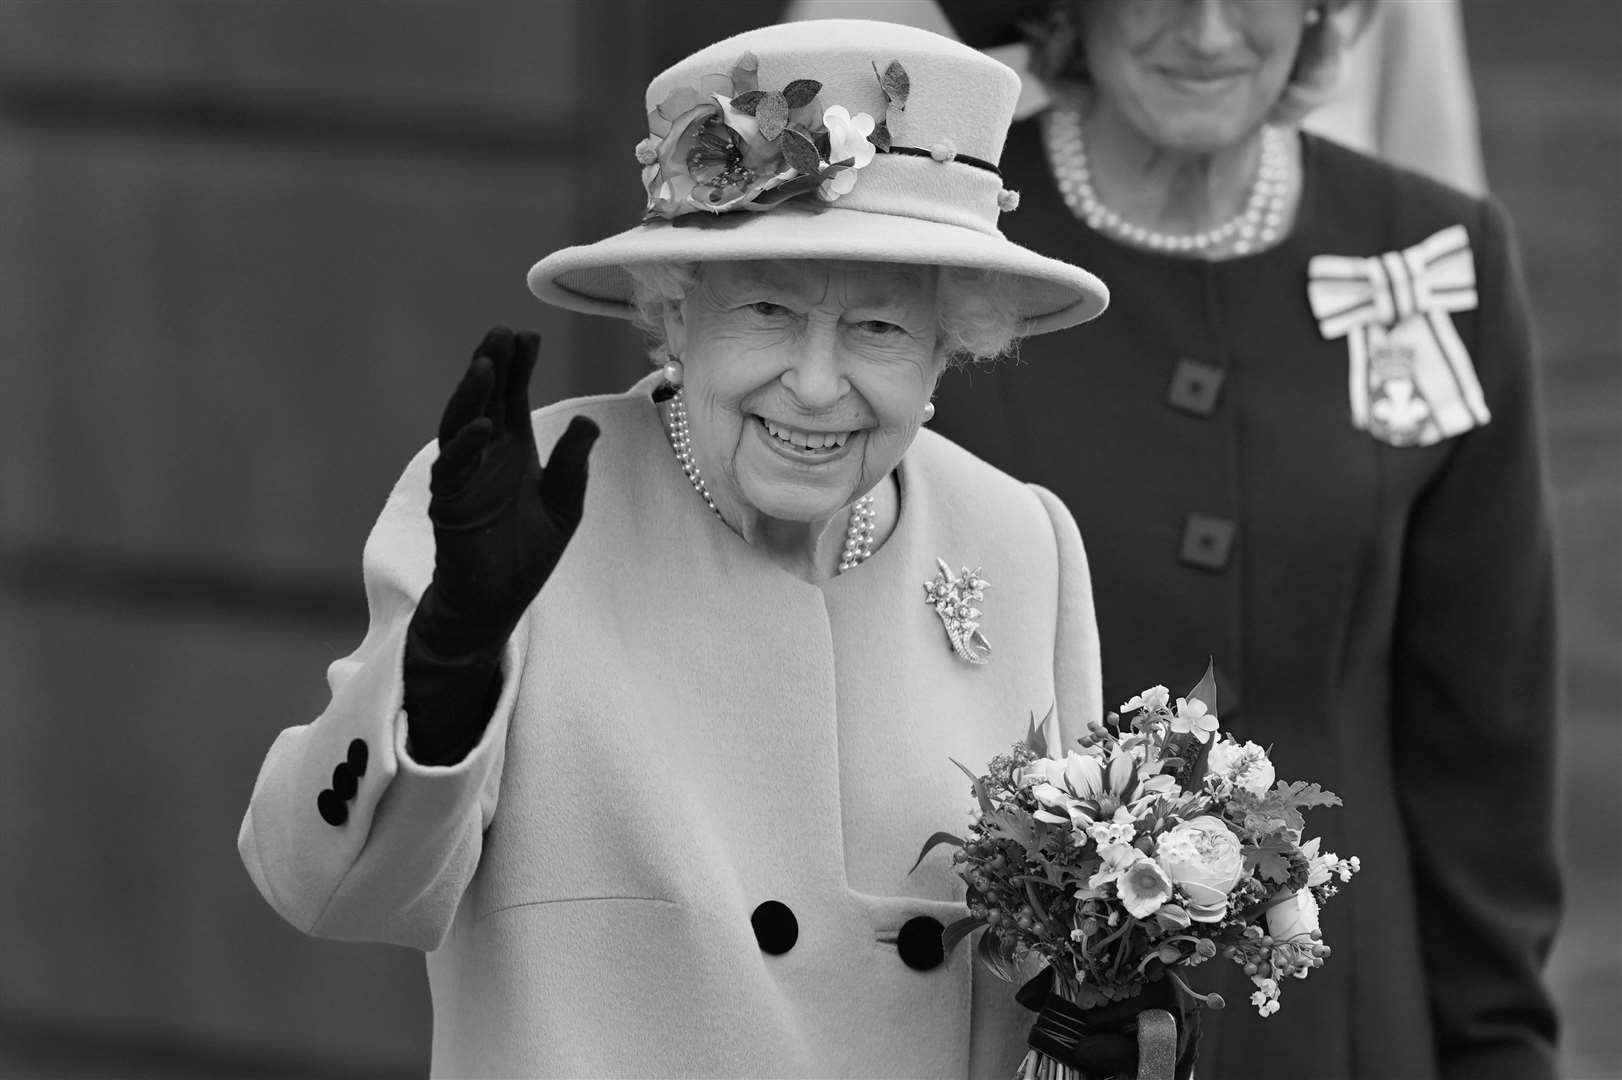 Queen Elizabeth II leaves after attending the opening ceremony of the sixth session of the Senedd in Cardiff in October last year